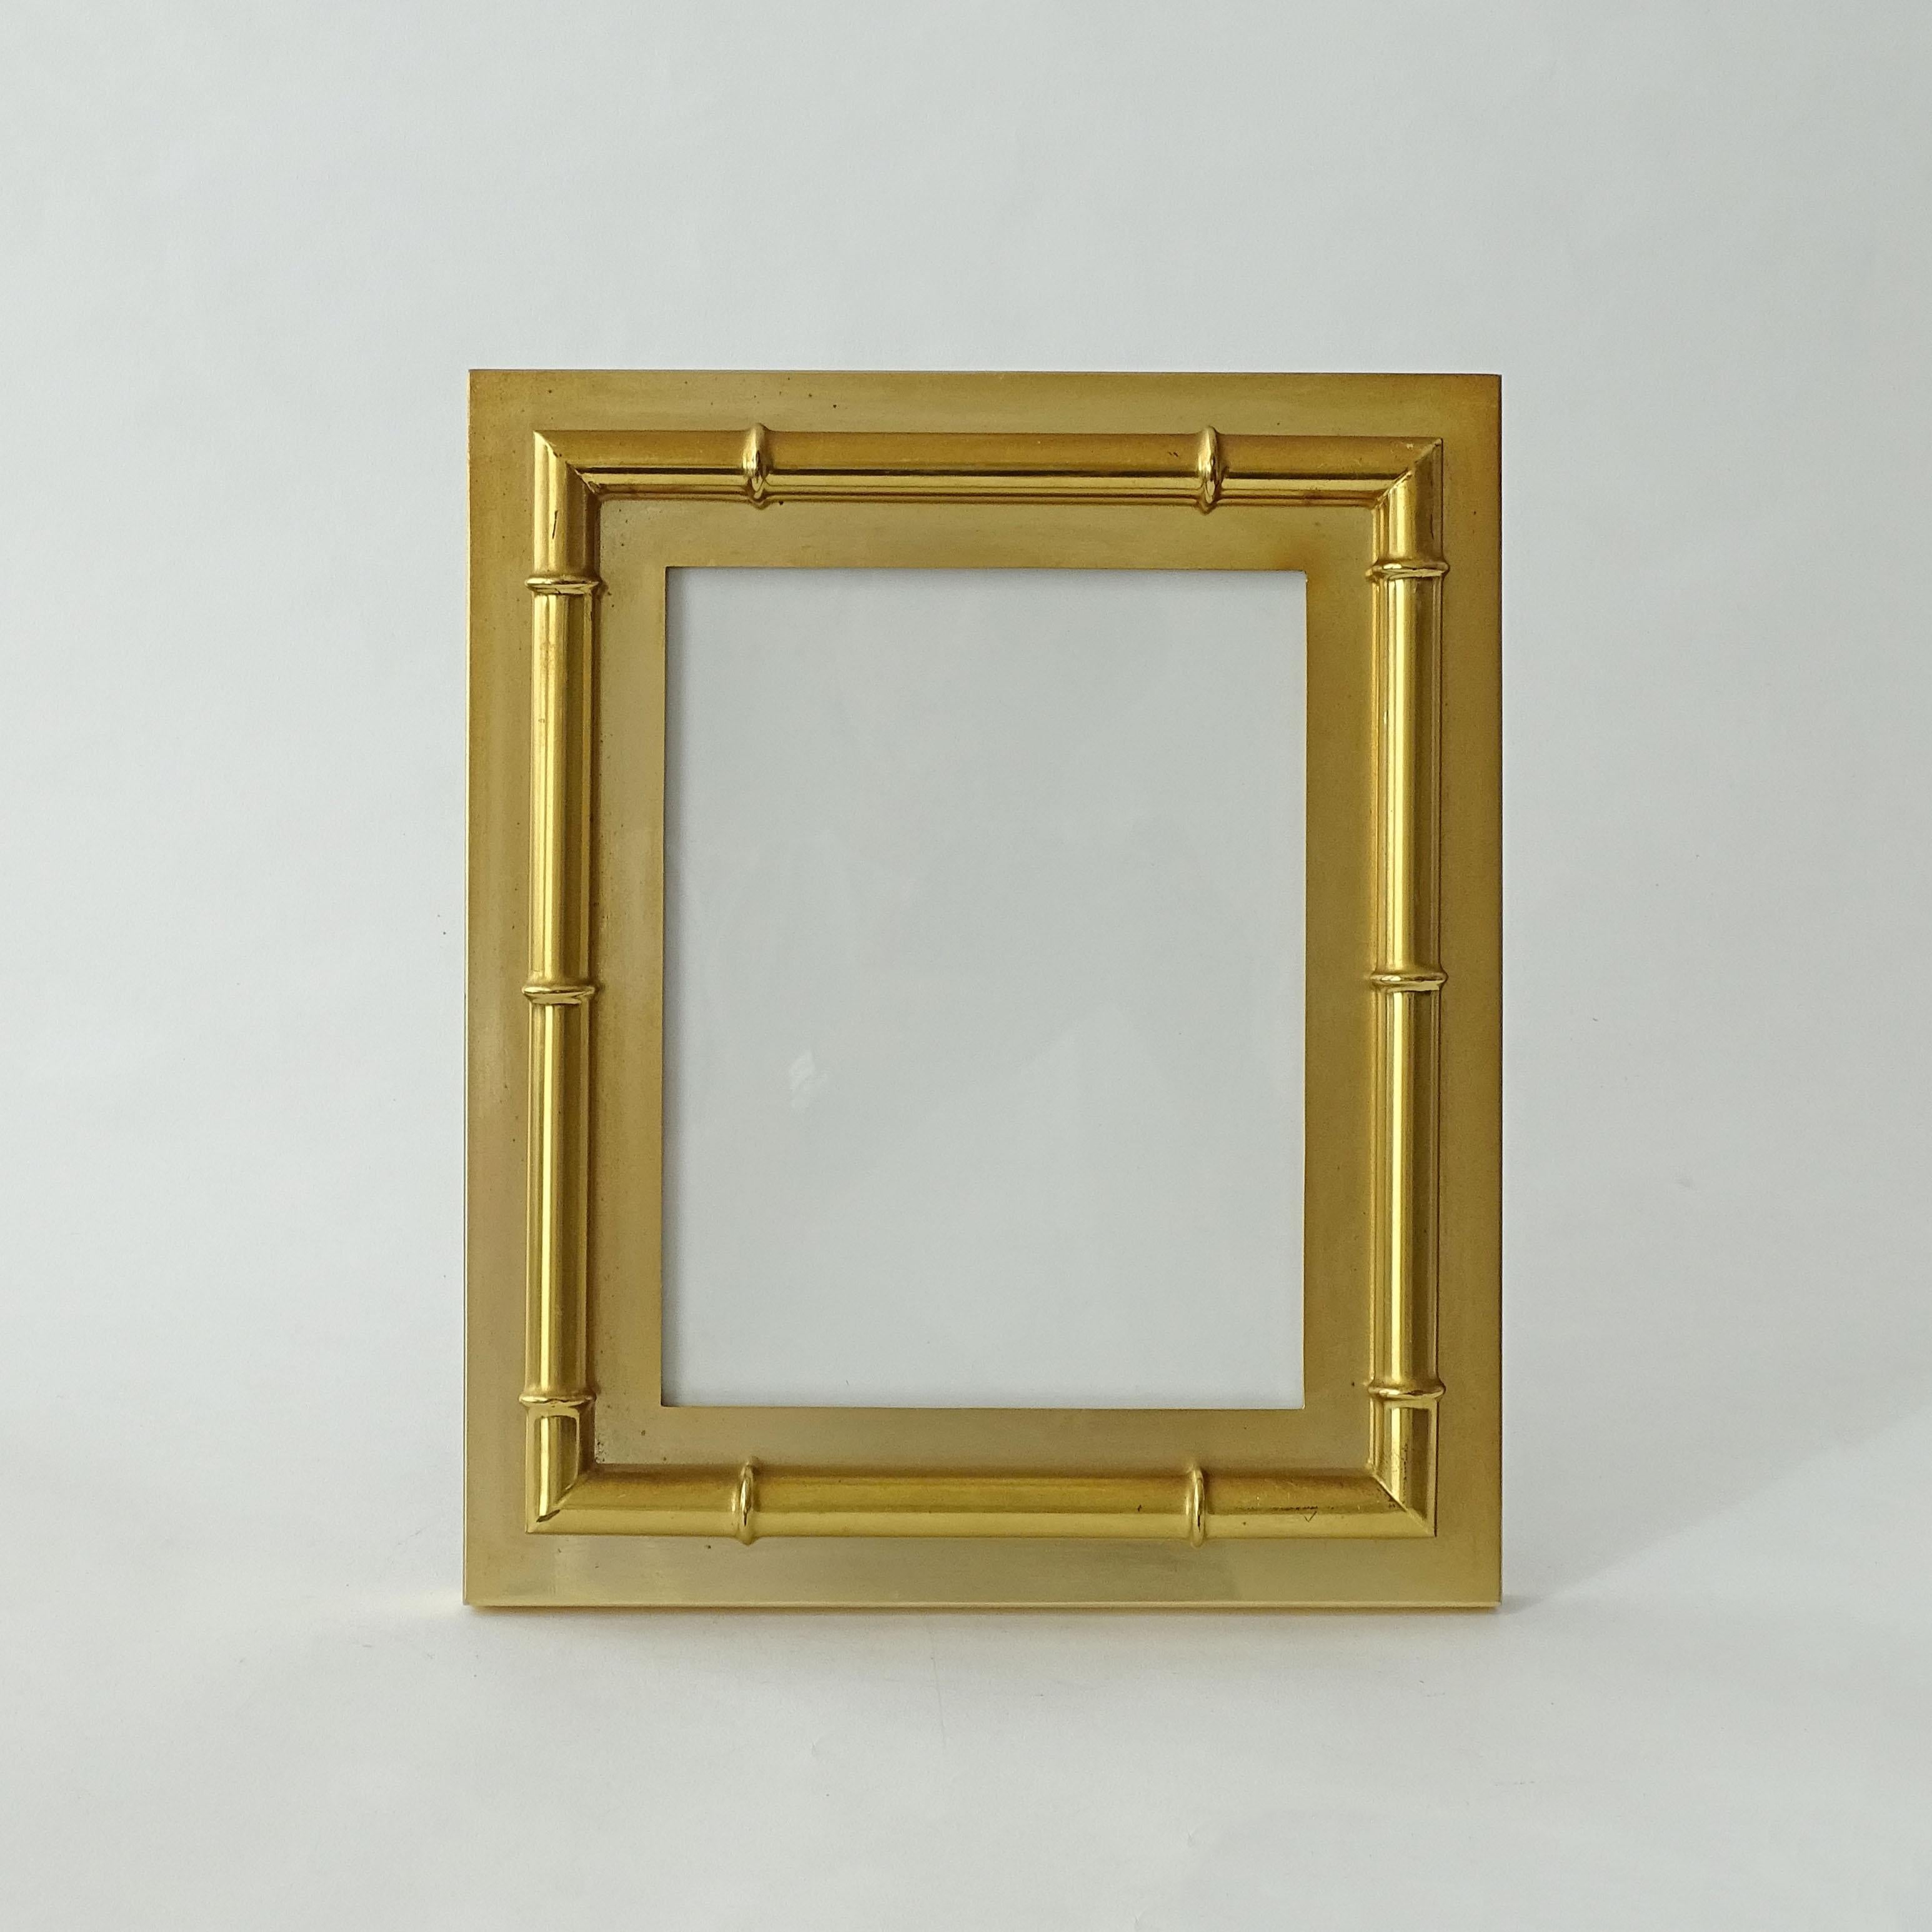 Beautiful and Bold  Paolo Traversi 1970s Brass Bamboo Picture Frame.
Inner picture size 16.5 x 21 cm